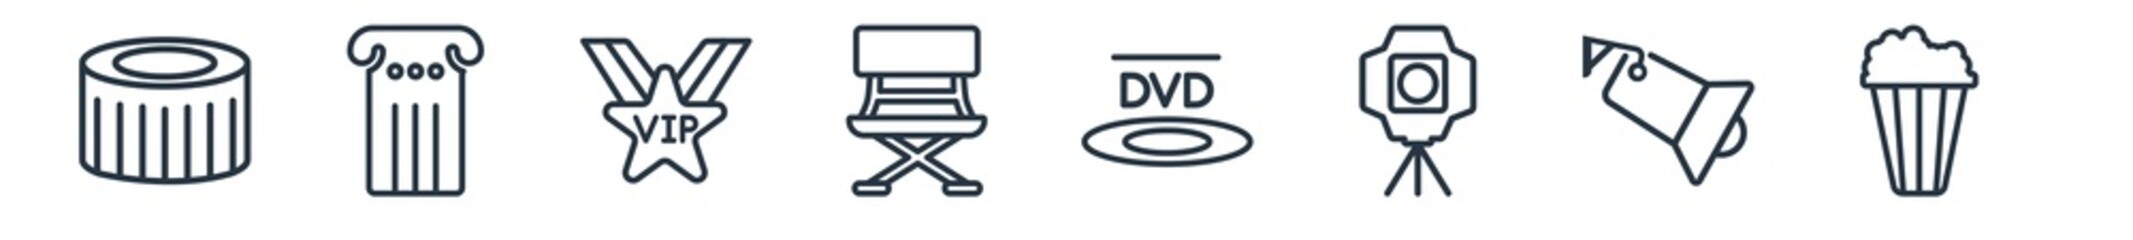 linear set of cinema outline icons. line vector icons such as zoetrope, theatre pillar, vip person, director film chair, dvd, popcorn bag vector illustration.